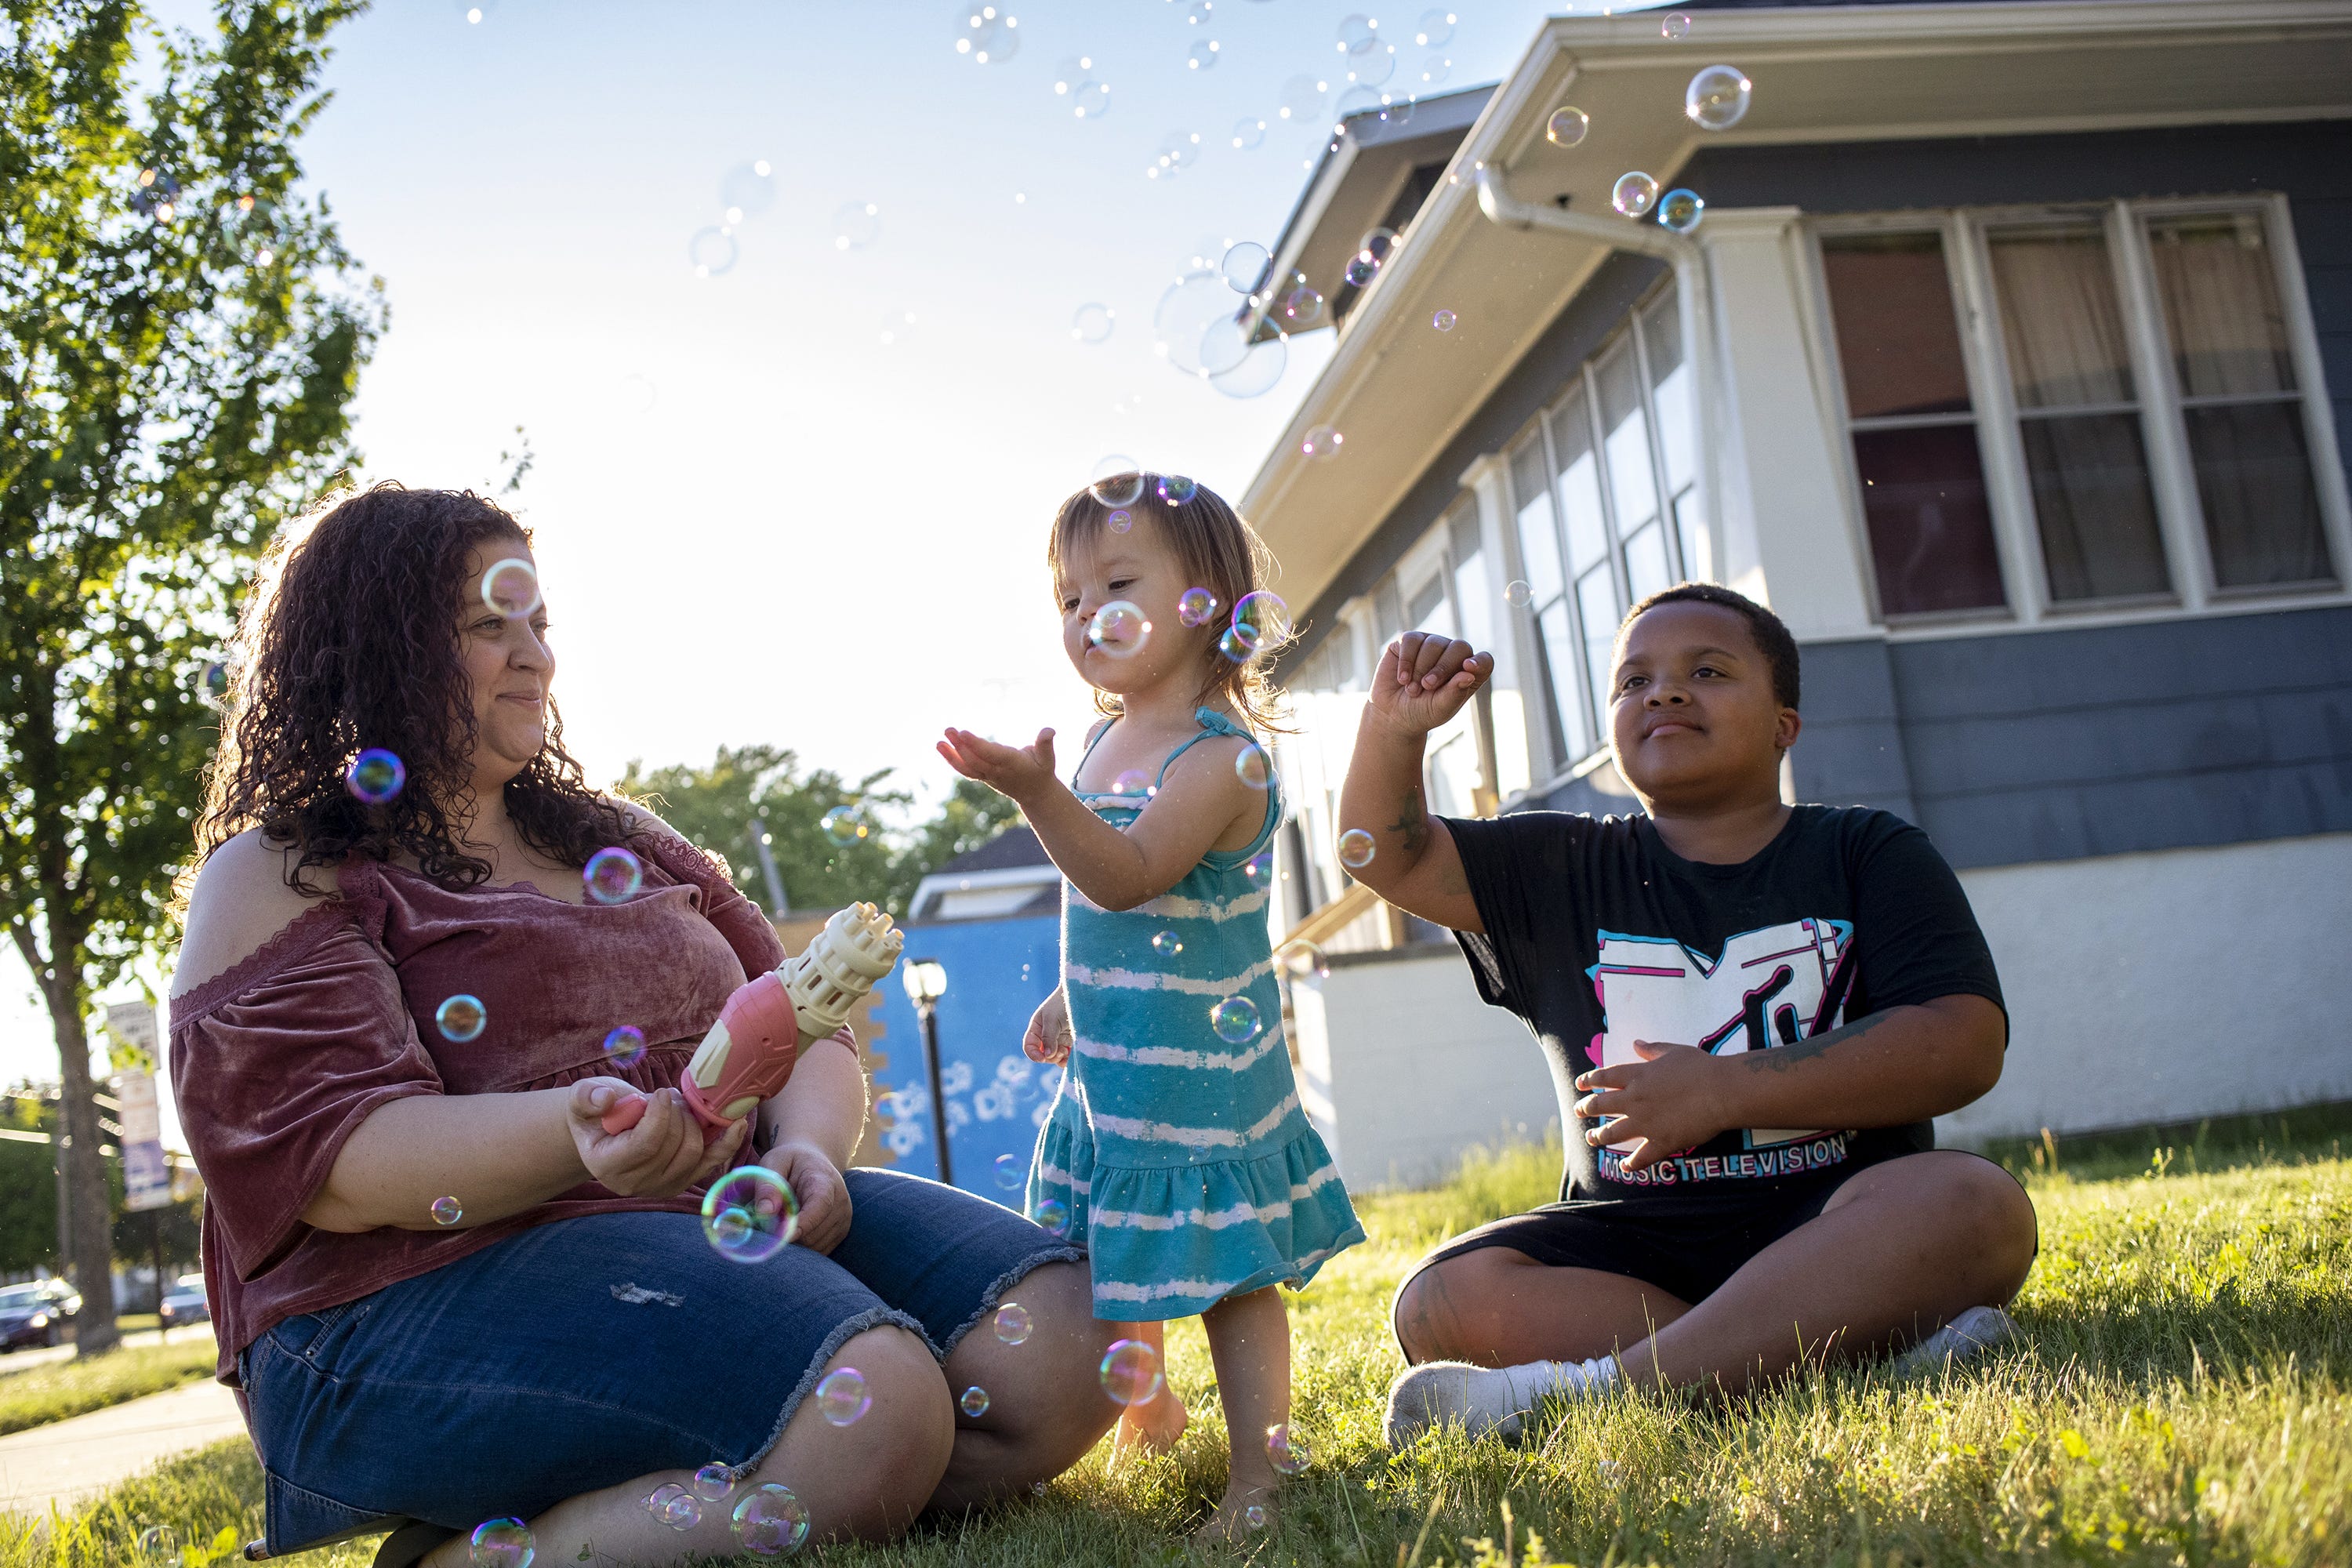 Jaleesa Gray plays with her children outside her home in Green Bay, Wis.